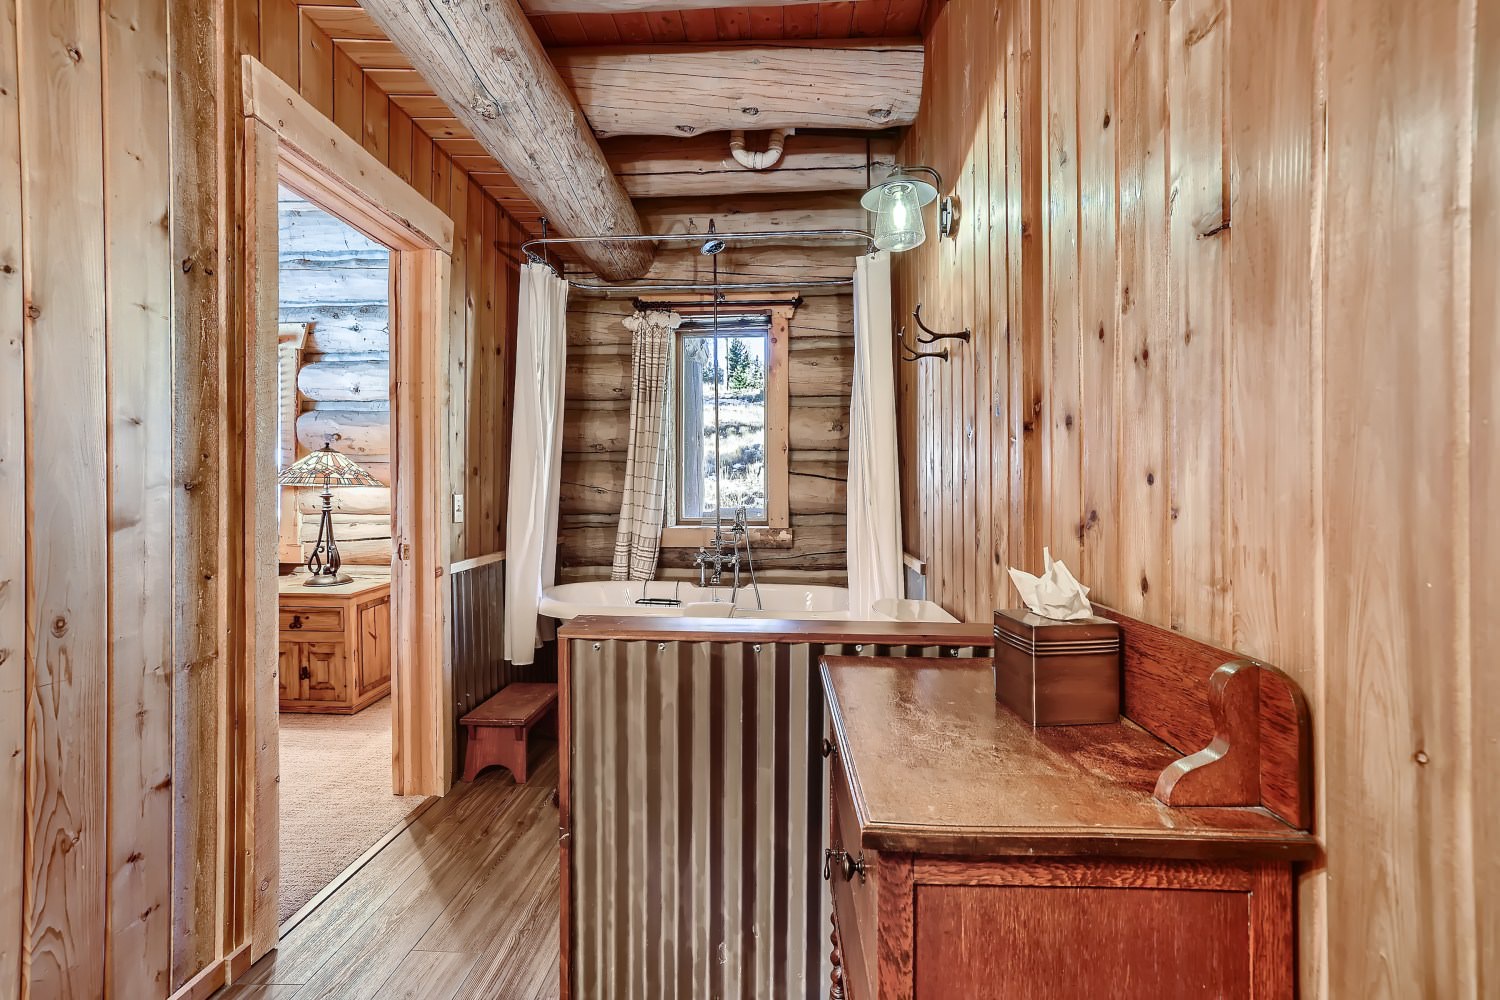 Shared bathroom on the main floor with claw foot tub, and shower combo